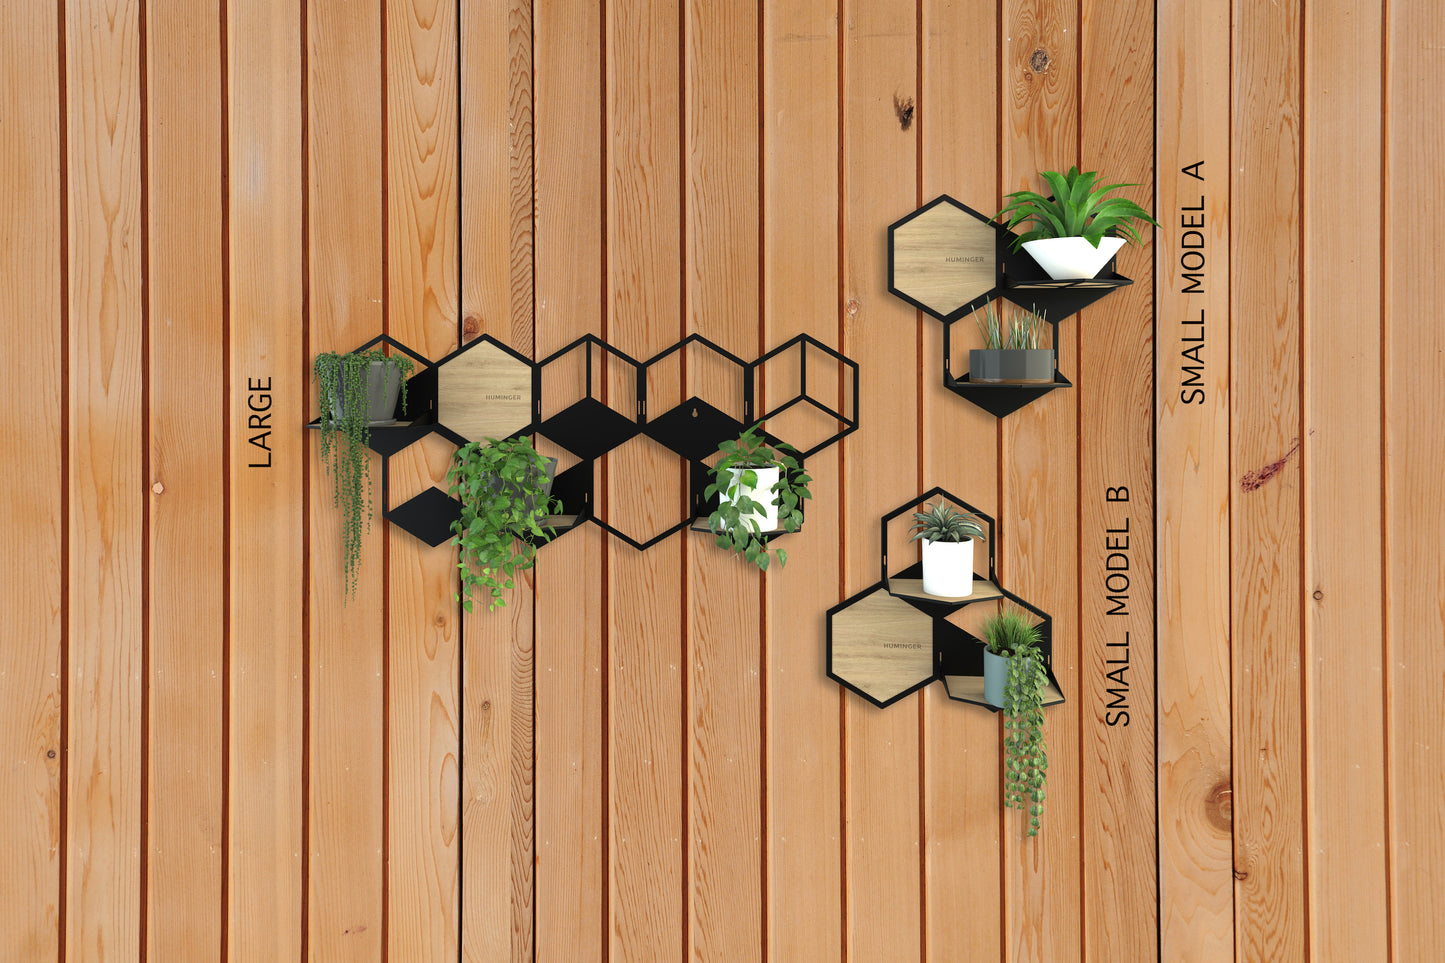 Oversized Metal Wall Decoration Set with Planter Shelves - 5 pieces